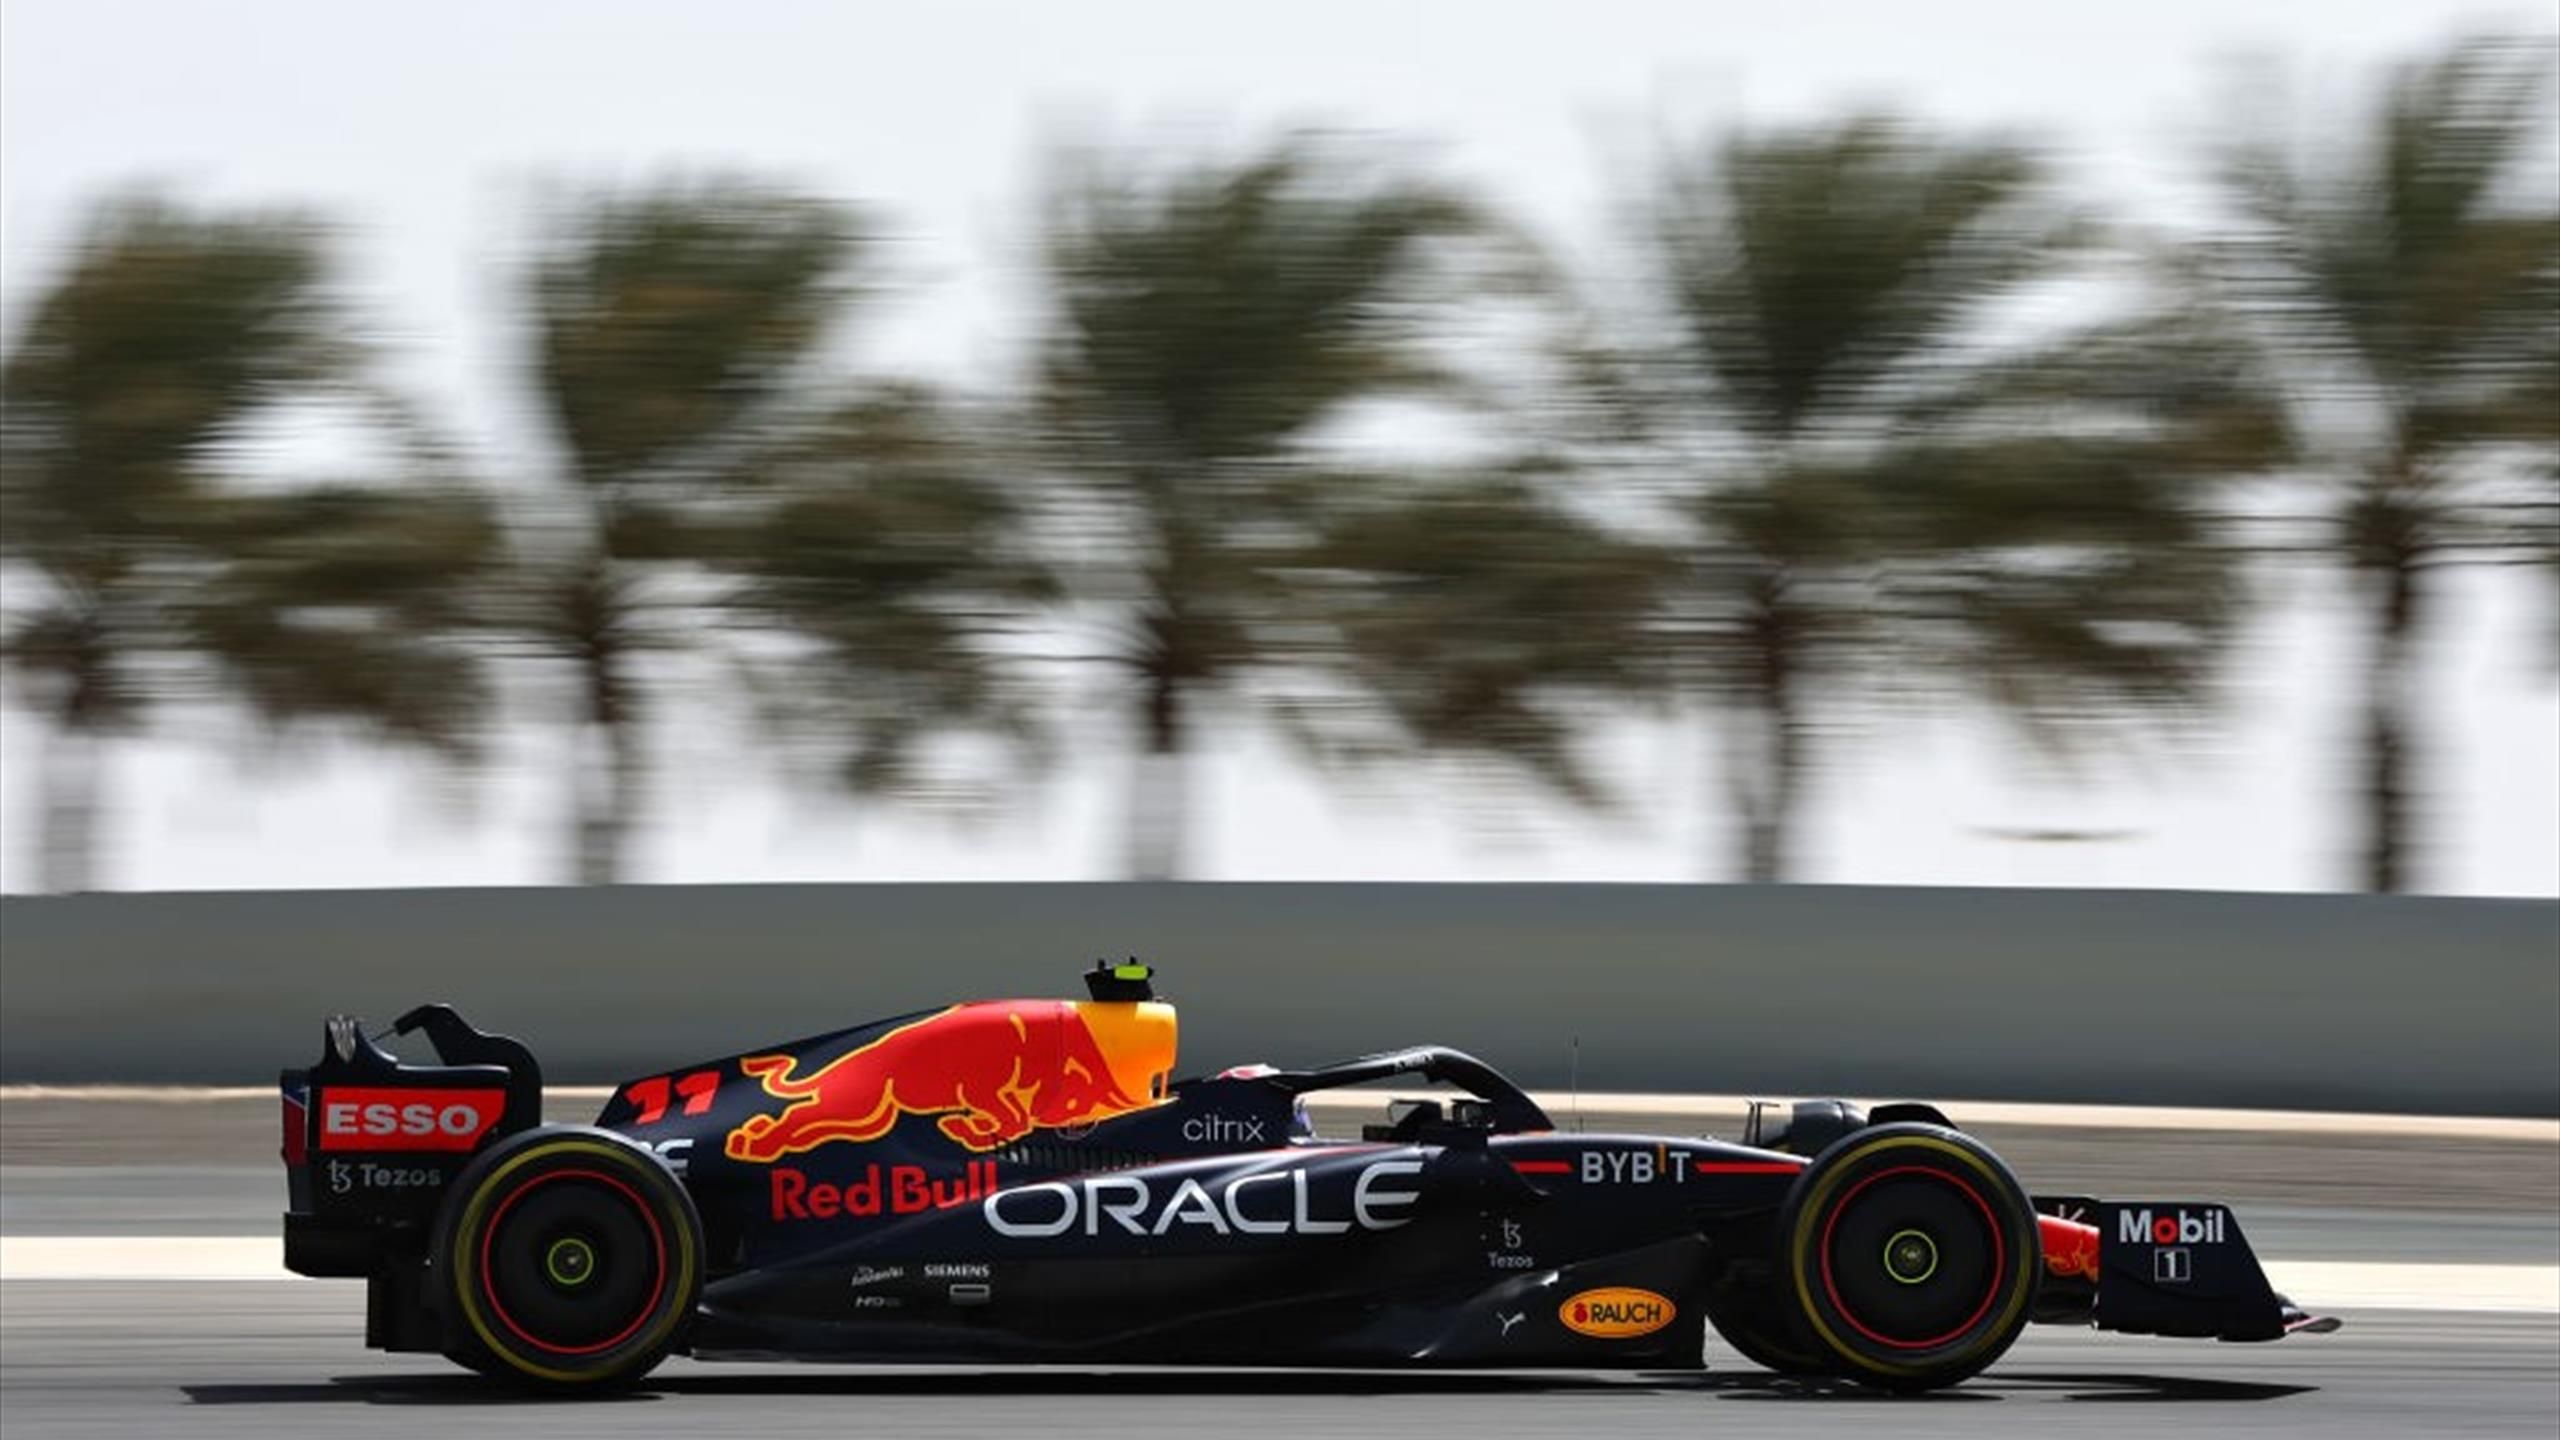 Sculpted sidepods and a reworked floor marked a new-look Red Bull on the final day of testing in Bahrain